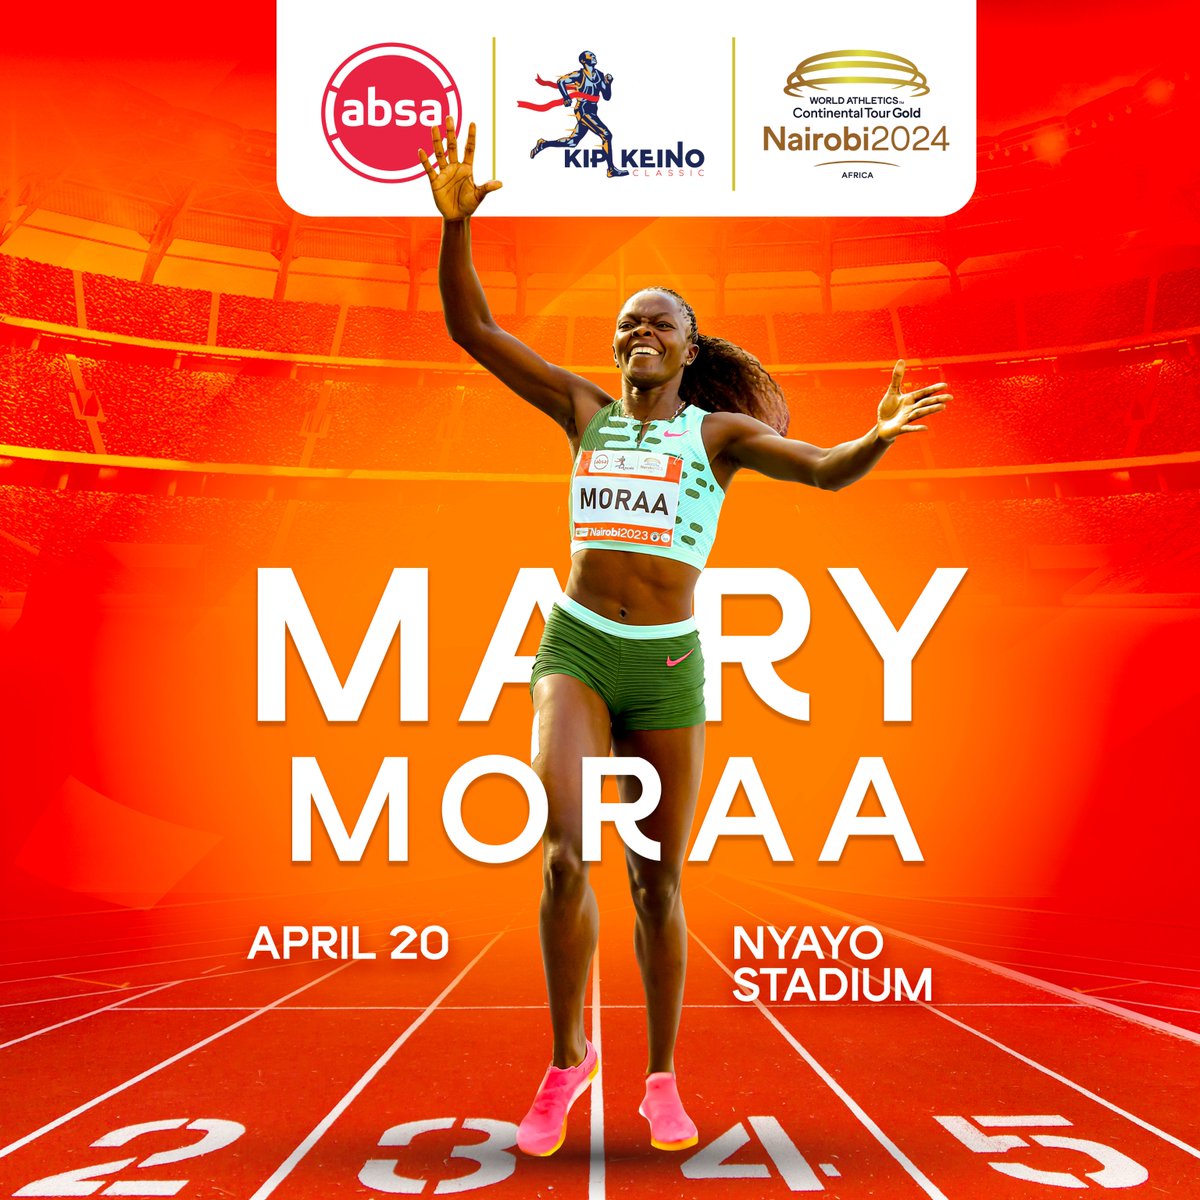 Hail the track Queen! @marymoraa800m is set for #AbsaKipkeinoClassic2024 Don't miss out on the adrenaline, the passion, and the triumph that she brings on Women's 800M . Let's make this Kip Keino Classic one for the books! #TwendeNyayoStadium